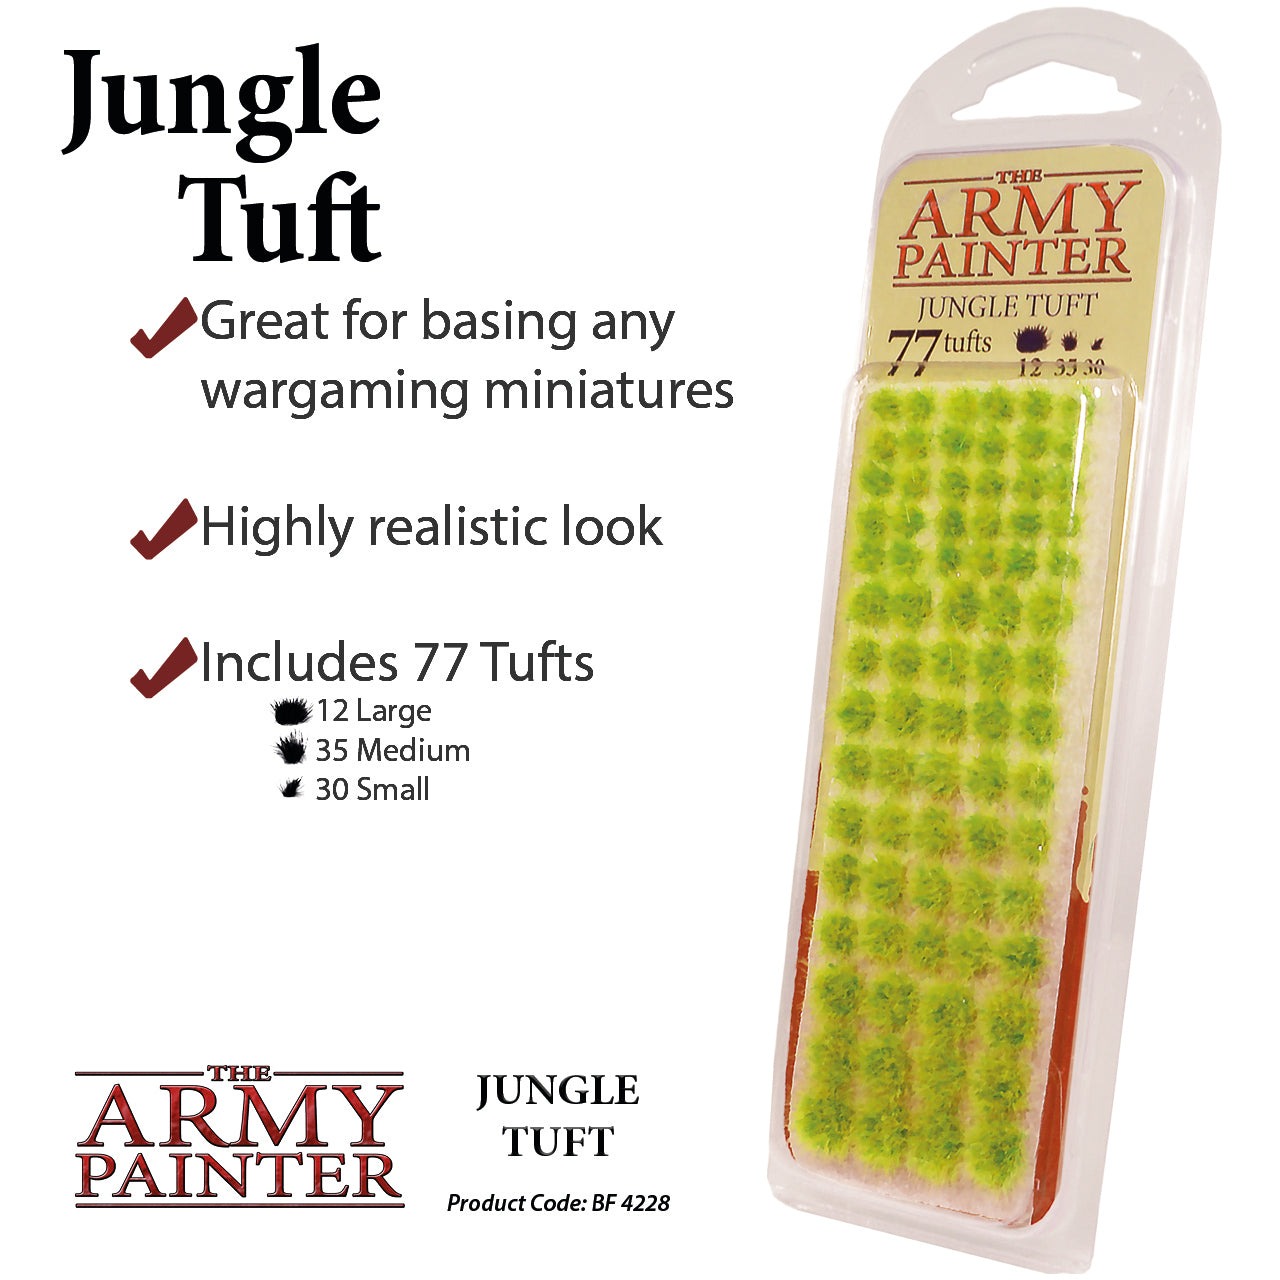 Jungle Tuft Battlefield Army Painter    | Red Claw Gaming